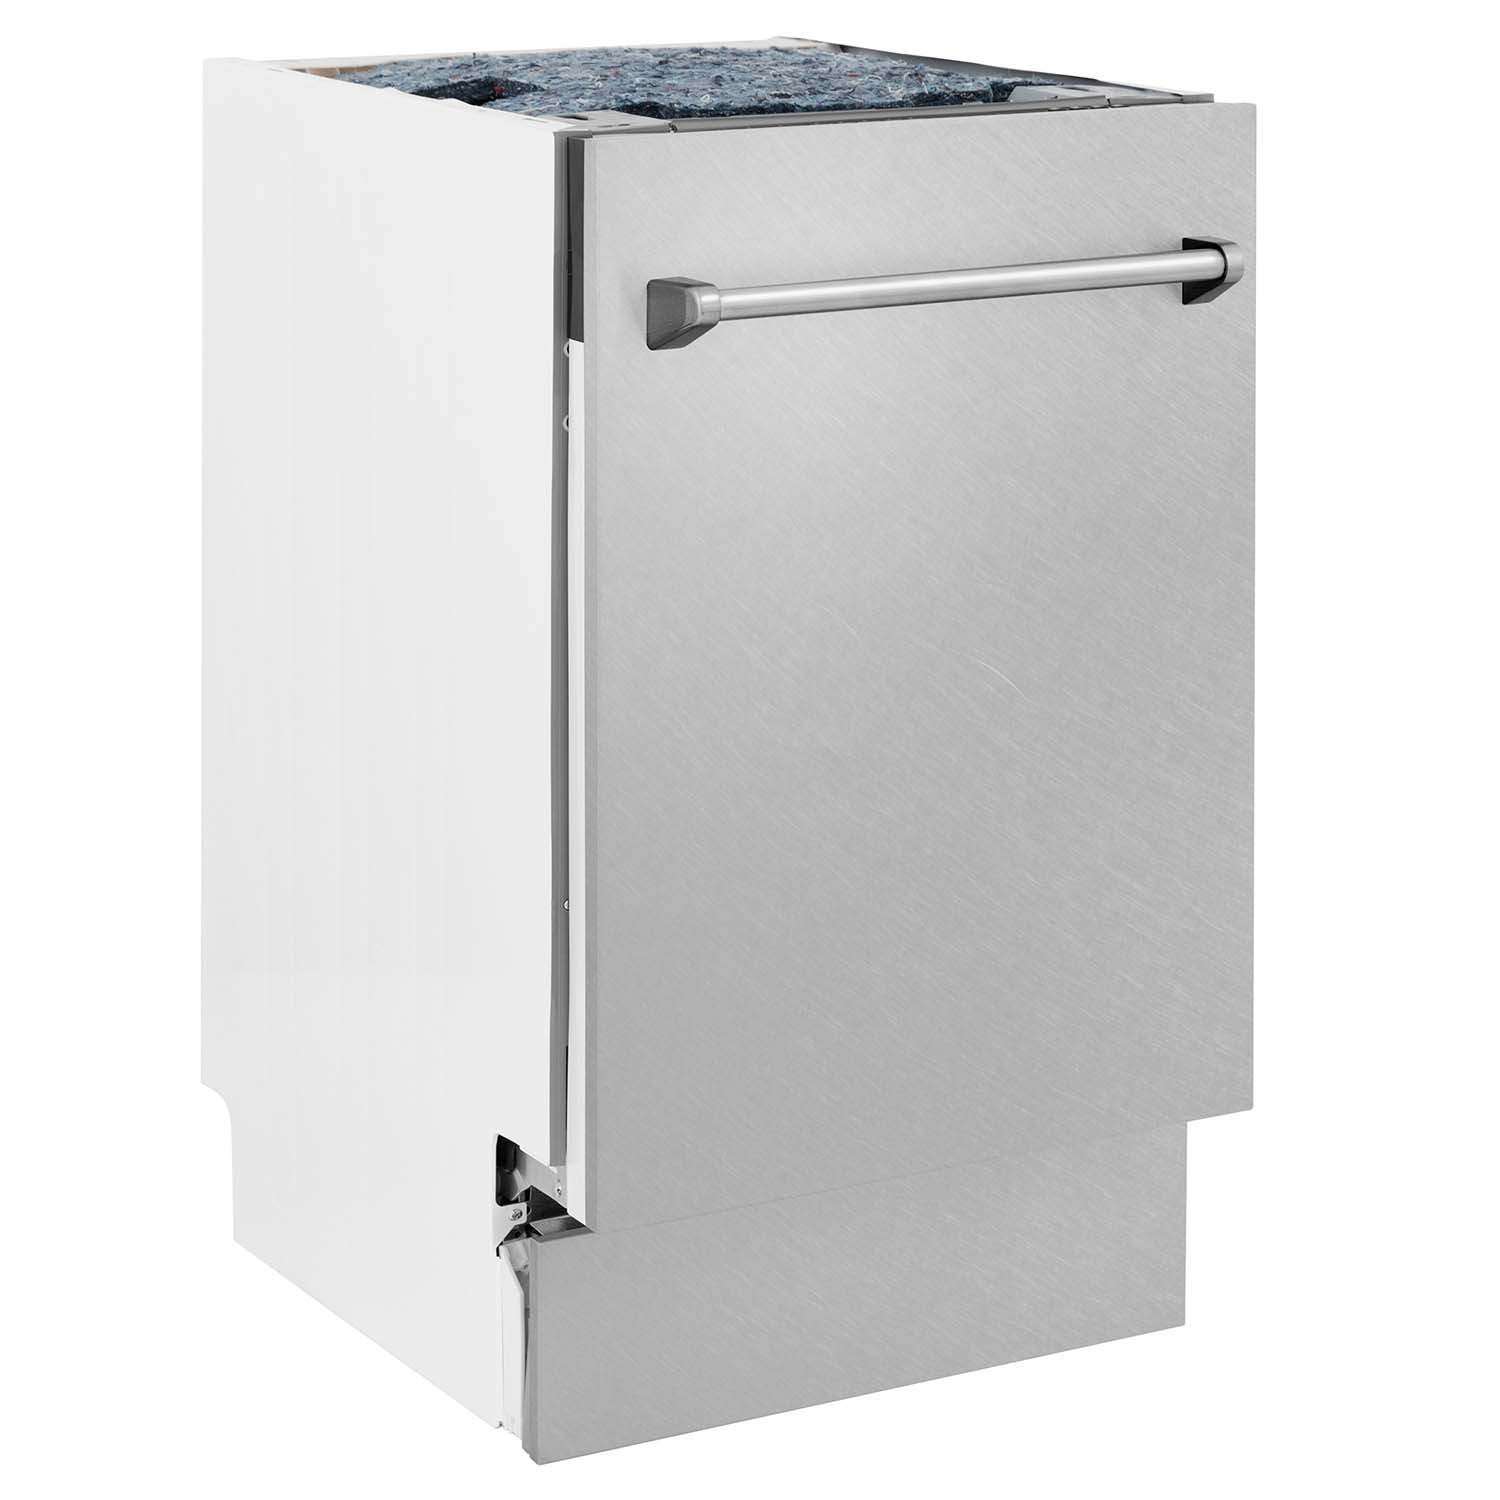 ZLINE 18" Tallac Series Dishwasher in DuraSnow side angle door closed.